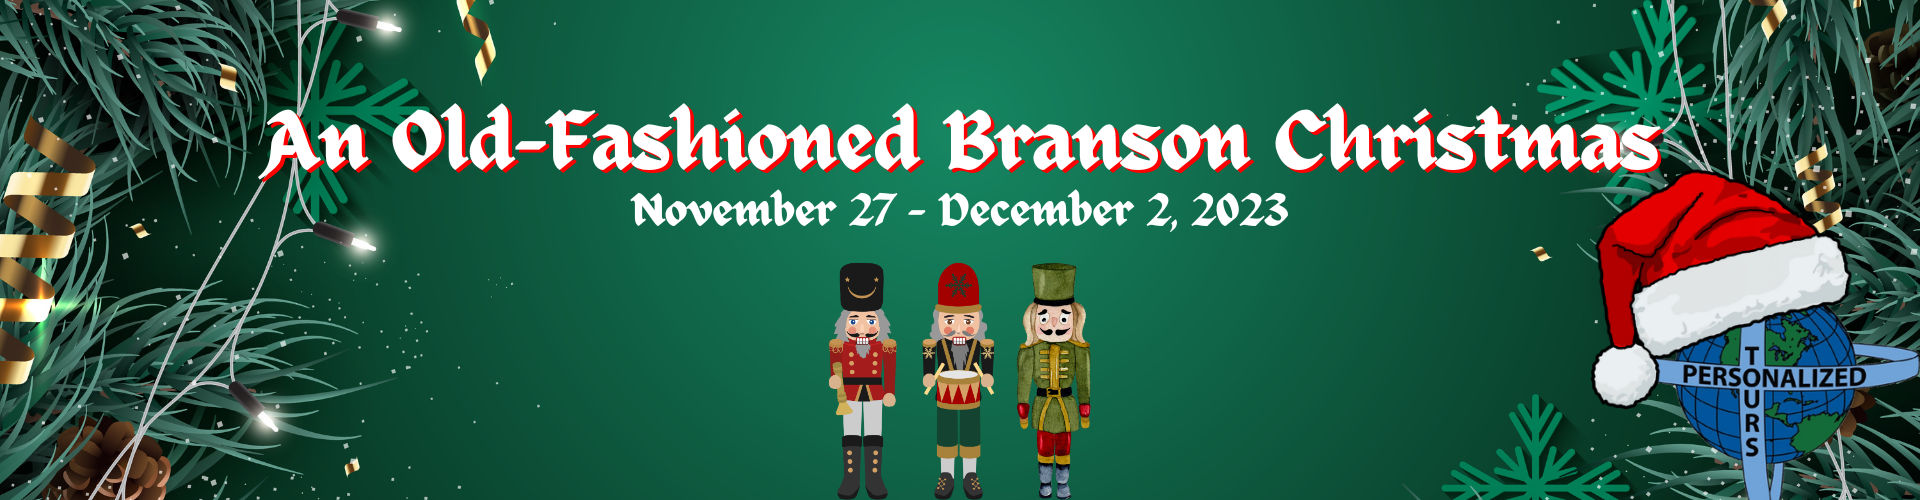 Old Fashioned Branson Christmas